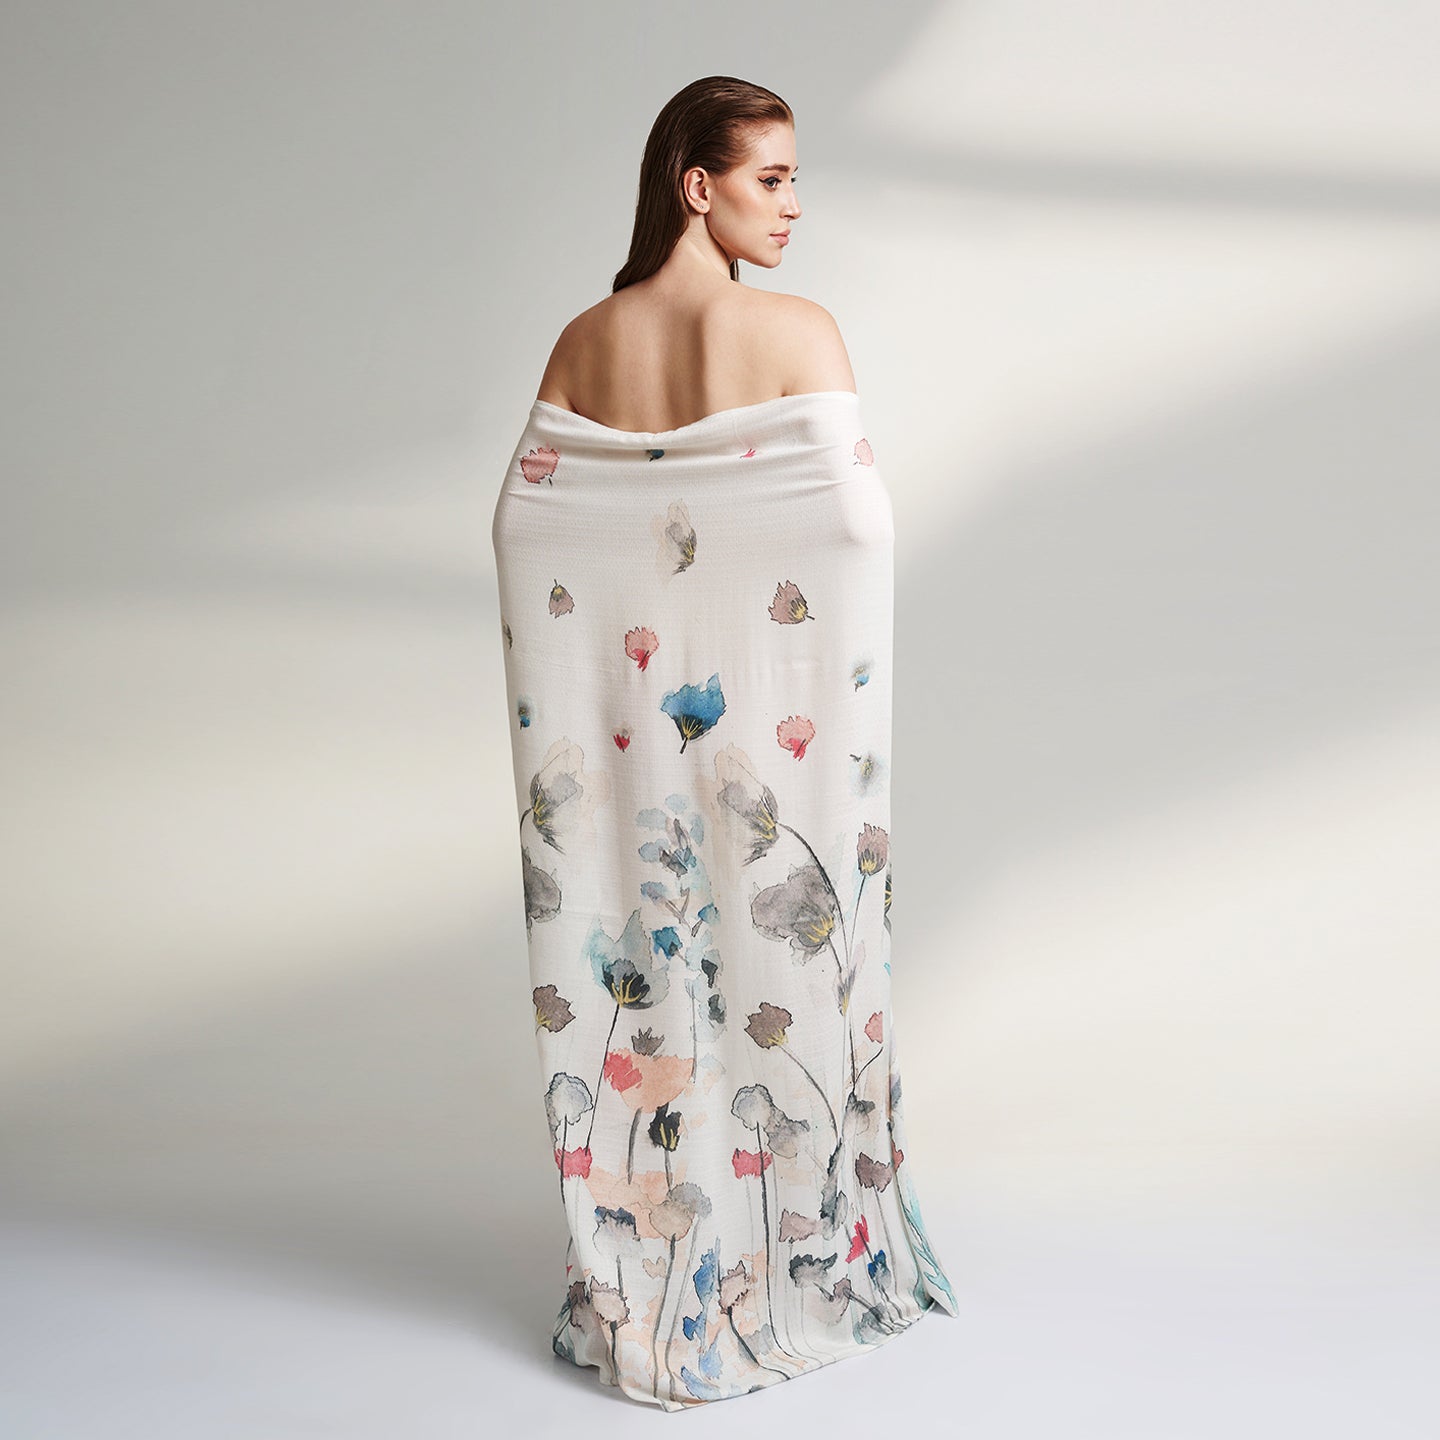 A Square organic Aloe vera fabric scarf, printed on a white base with multicolor flowers and petals flying.